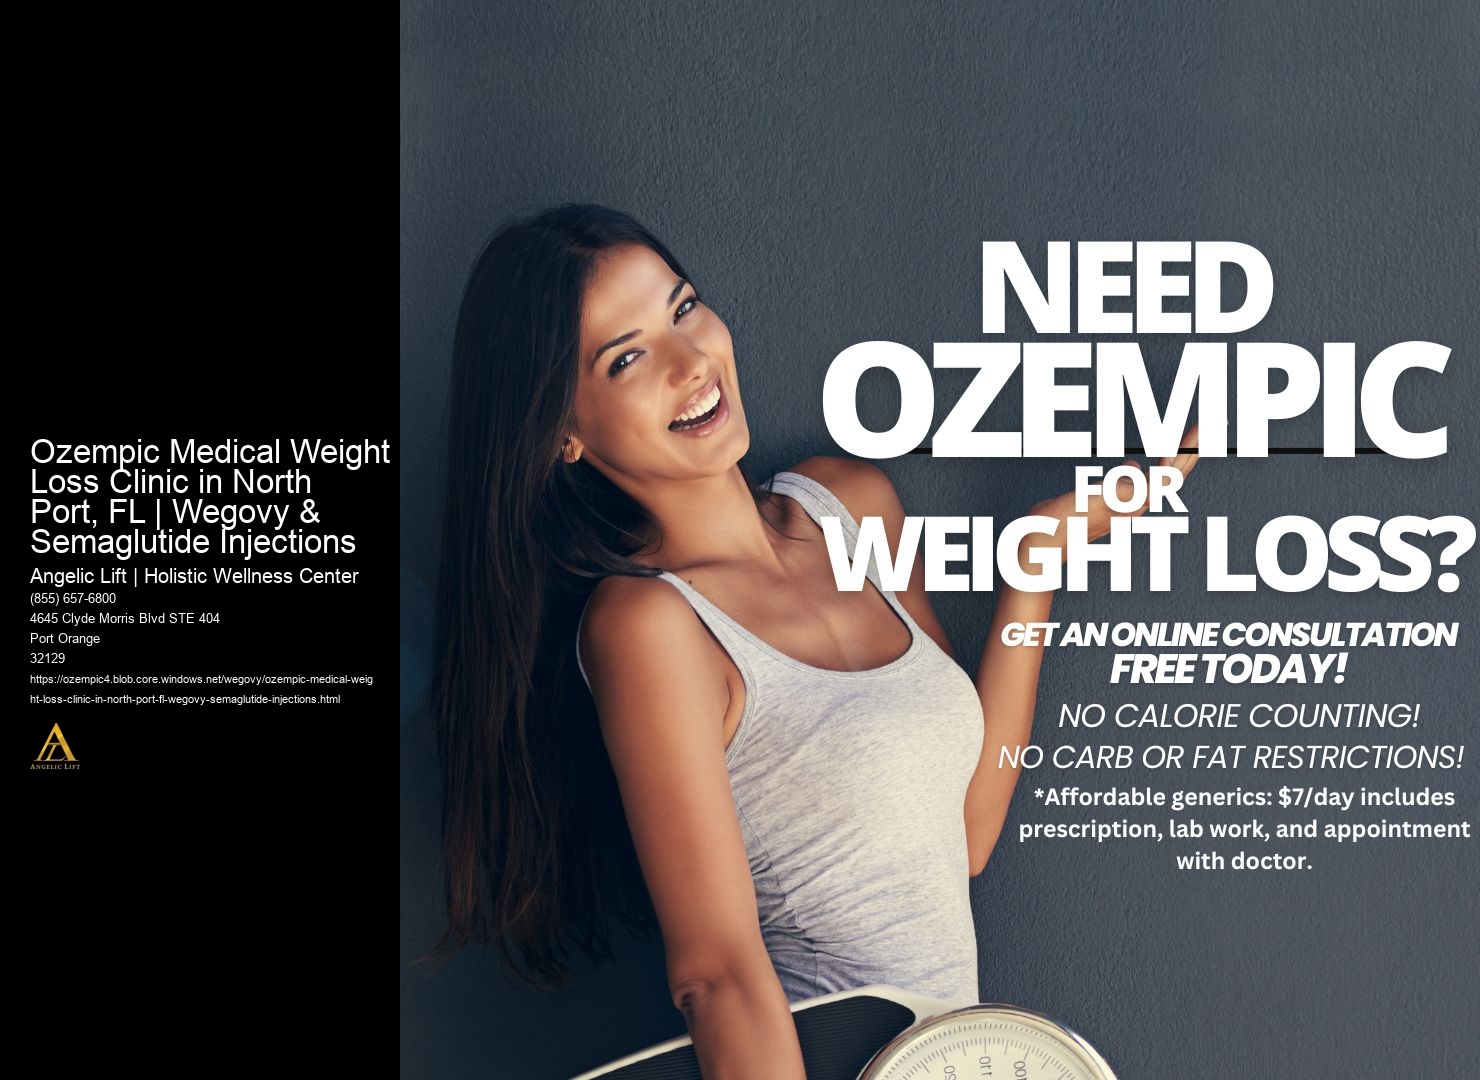 Ozempic Medical Weight Loss Clinic in North Port, FL | Wegovy & Semaglutide Injections